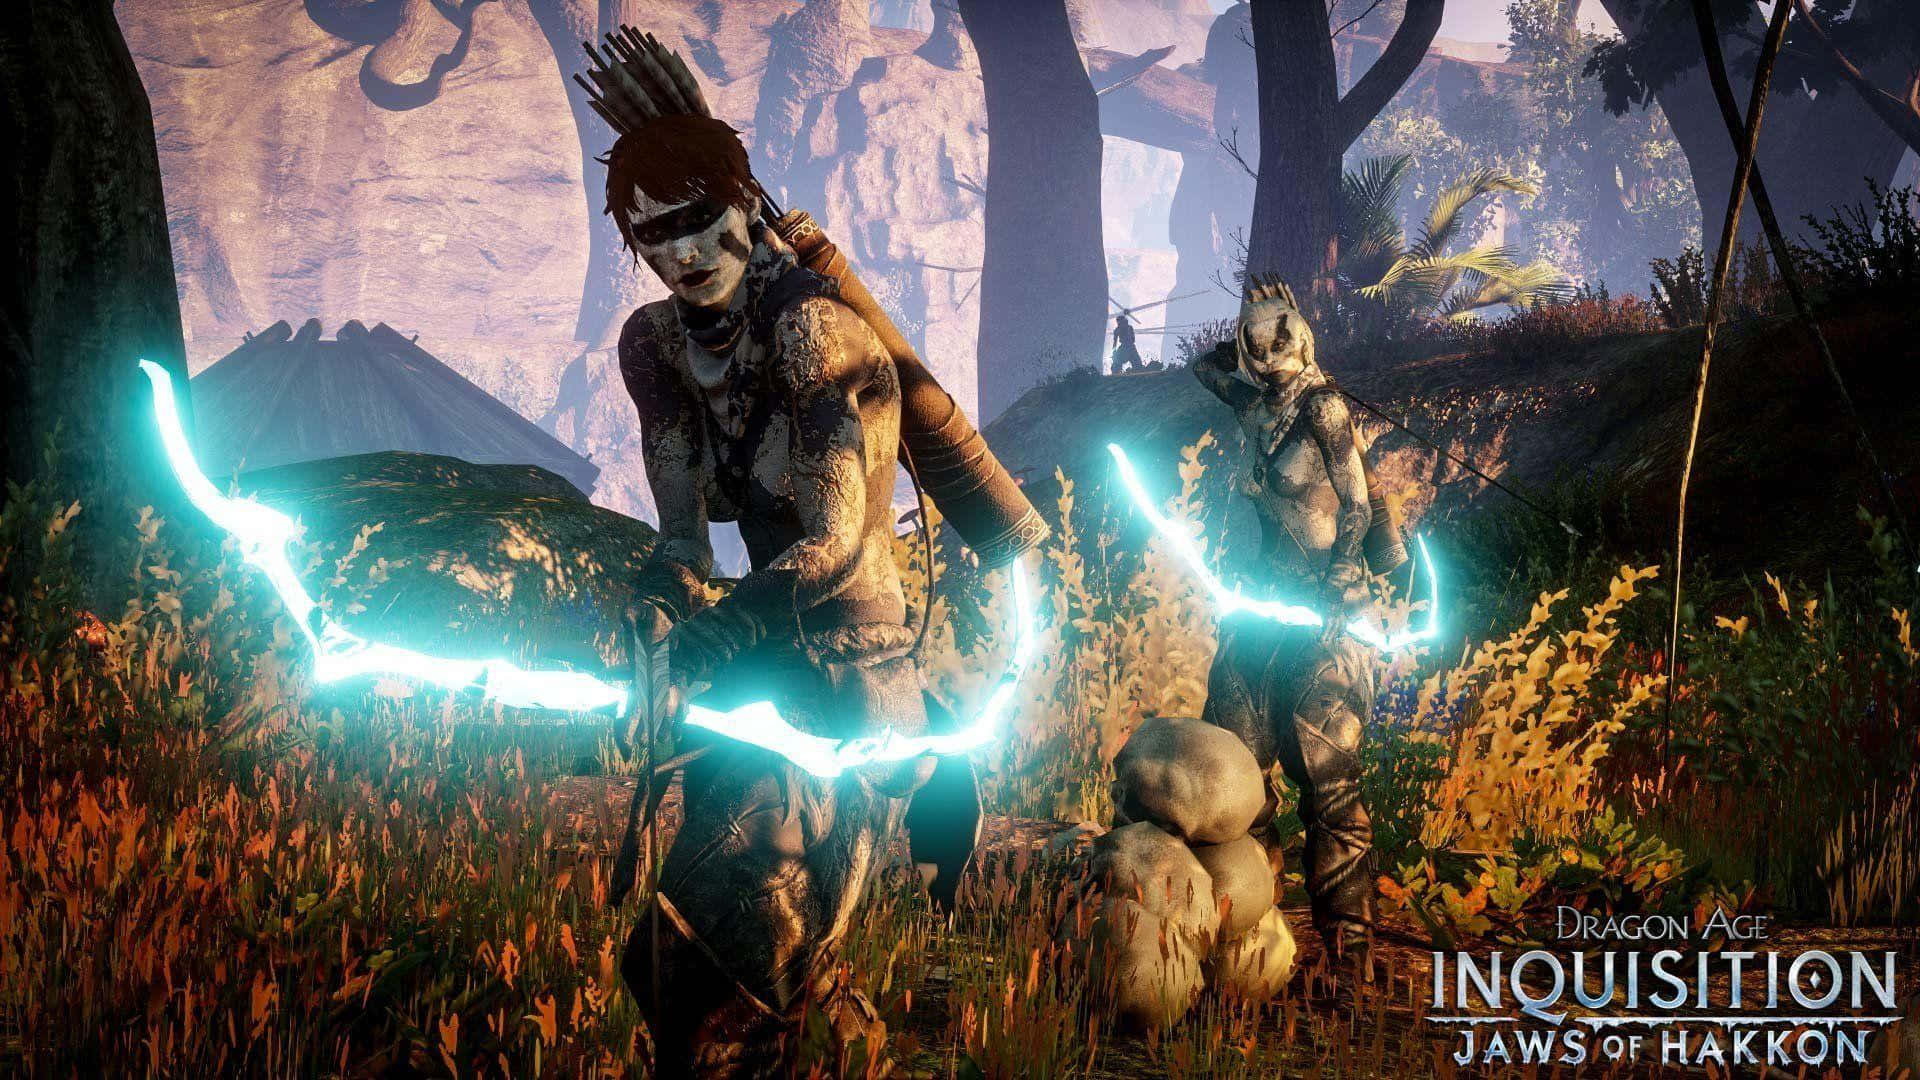 Experience the Epic Fantasy Adventure with Best Dragon Age: Inquisition